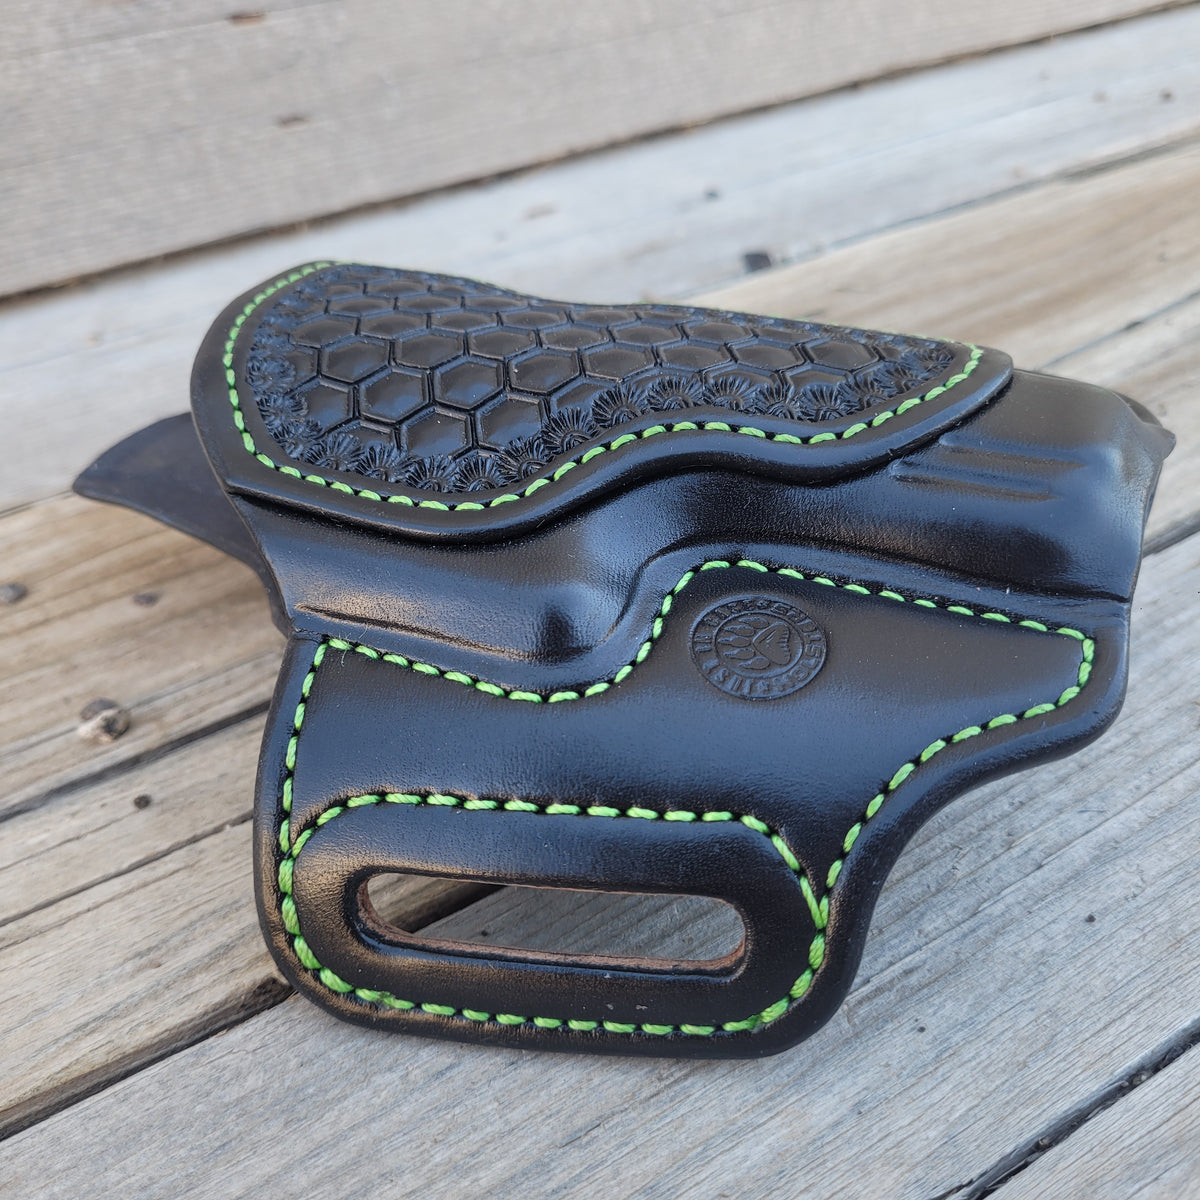 Glock 19/23 Classic Holster All Black, Zombie Green Stitching, Partial Hex Stamp